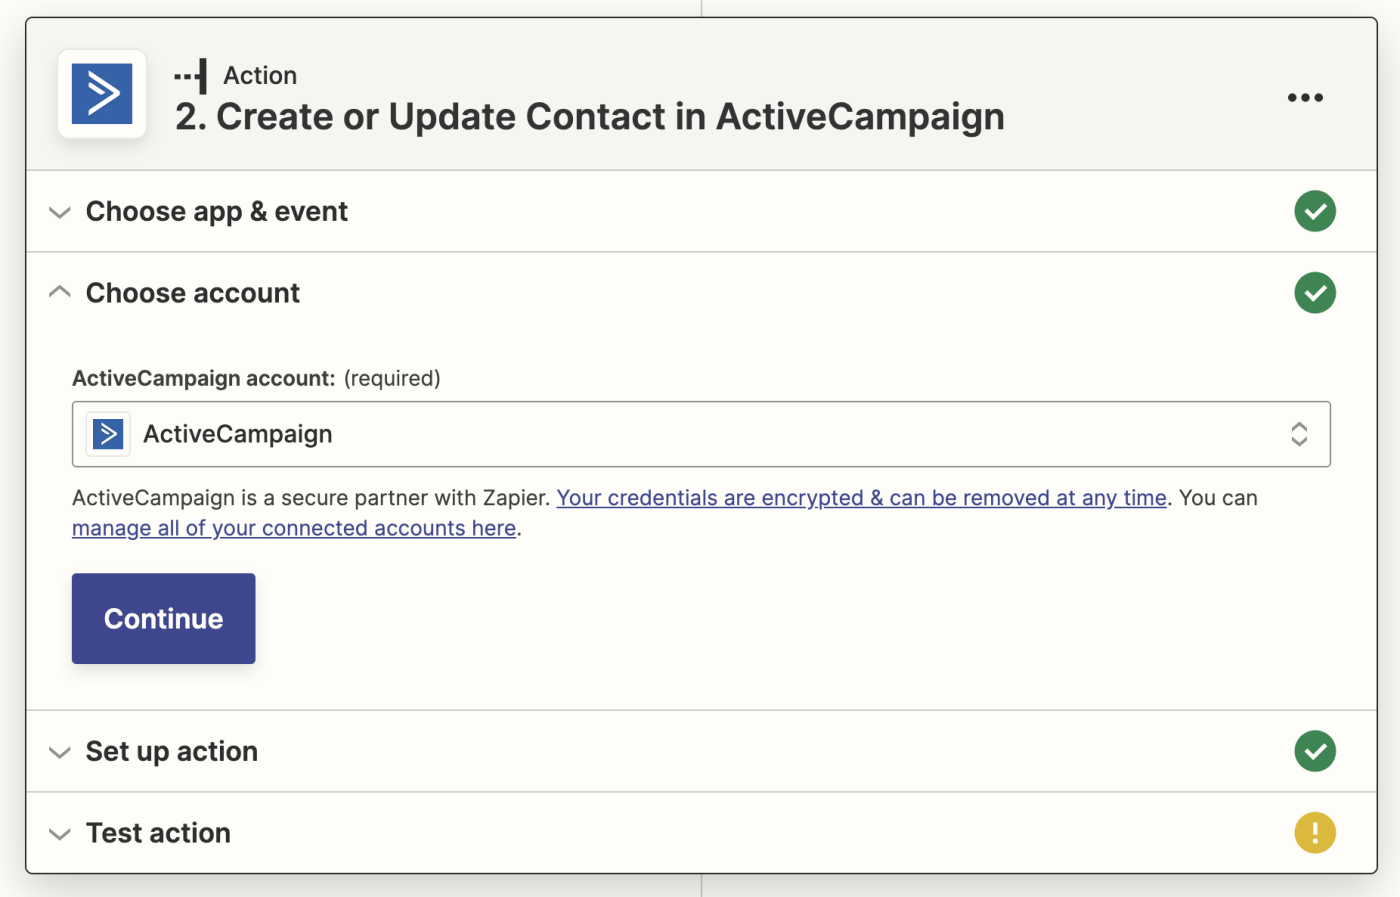 Select an ActiveCampaign account in the account dropdown menu.